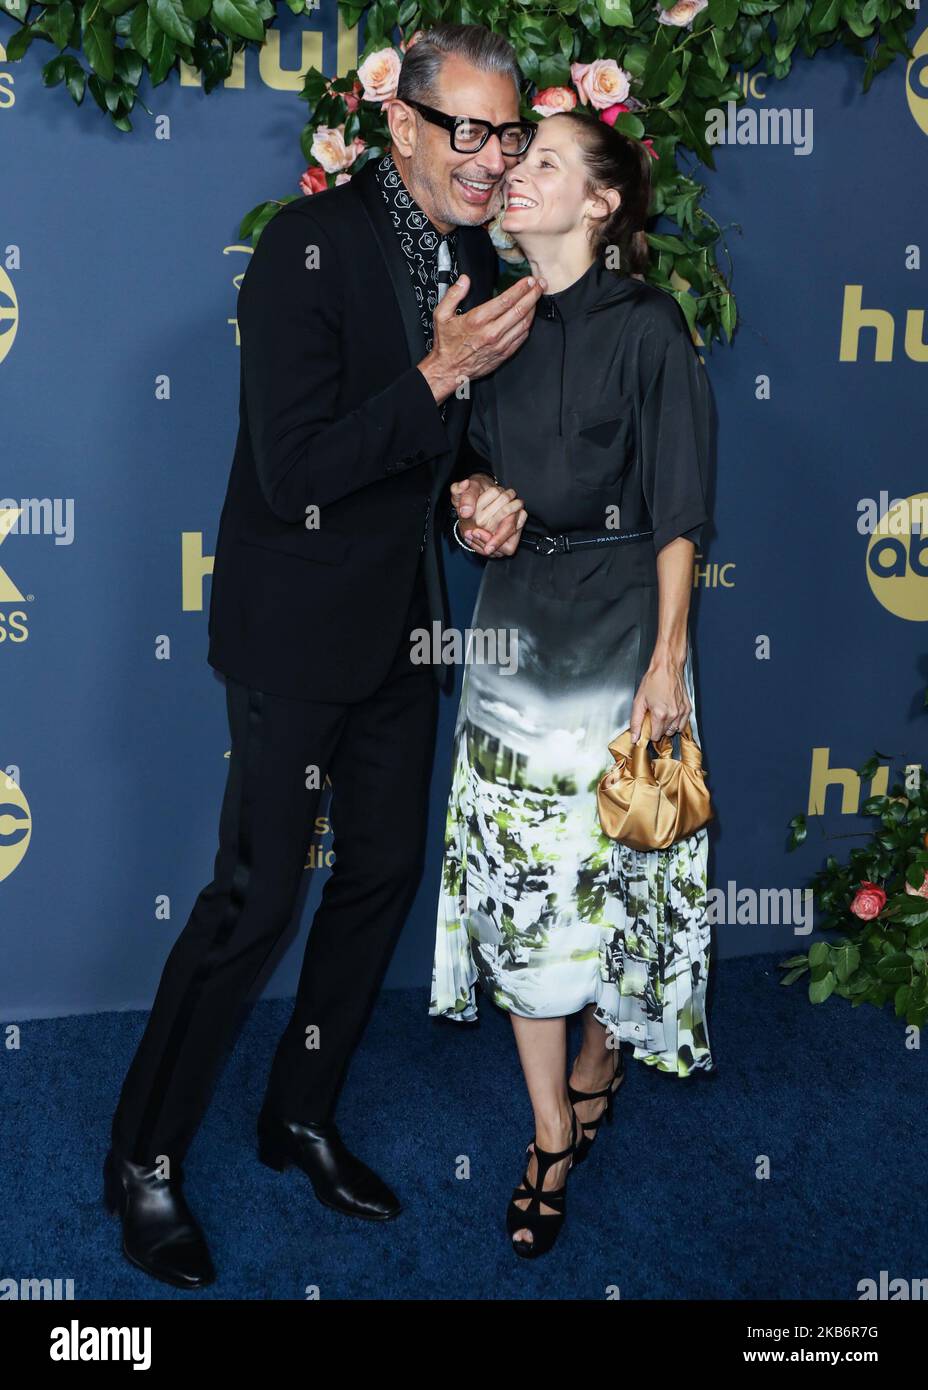 LOS ANGELES, CALIFORNIA, USA - SEPTEMBER 22: Jeff Goldblum and Emilie Livingston arrive at the Walt Disney Television 2019 EMMY Award Post Party held at Otium on September 22, 2019 in Los Angeles, California, United States. (Photo by David Acosta/Image Press Agency/NurPhoto) Stock Photo